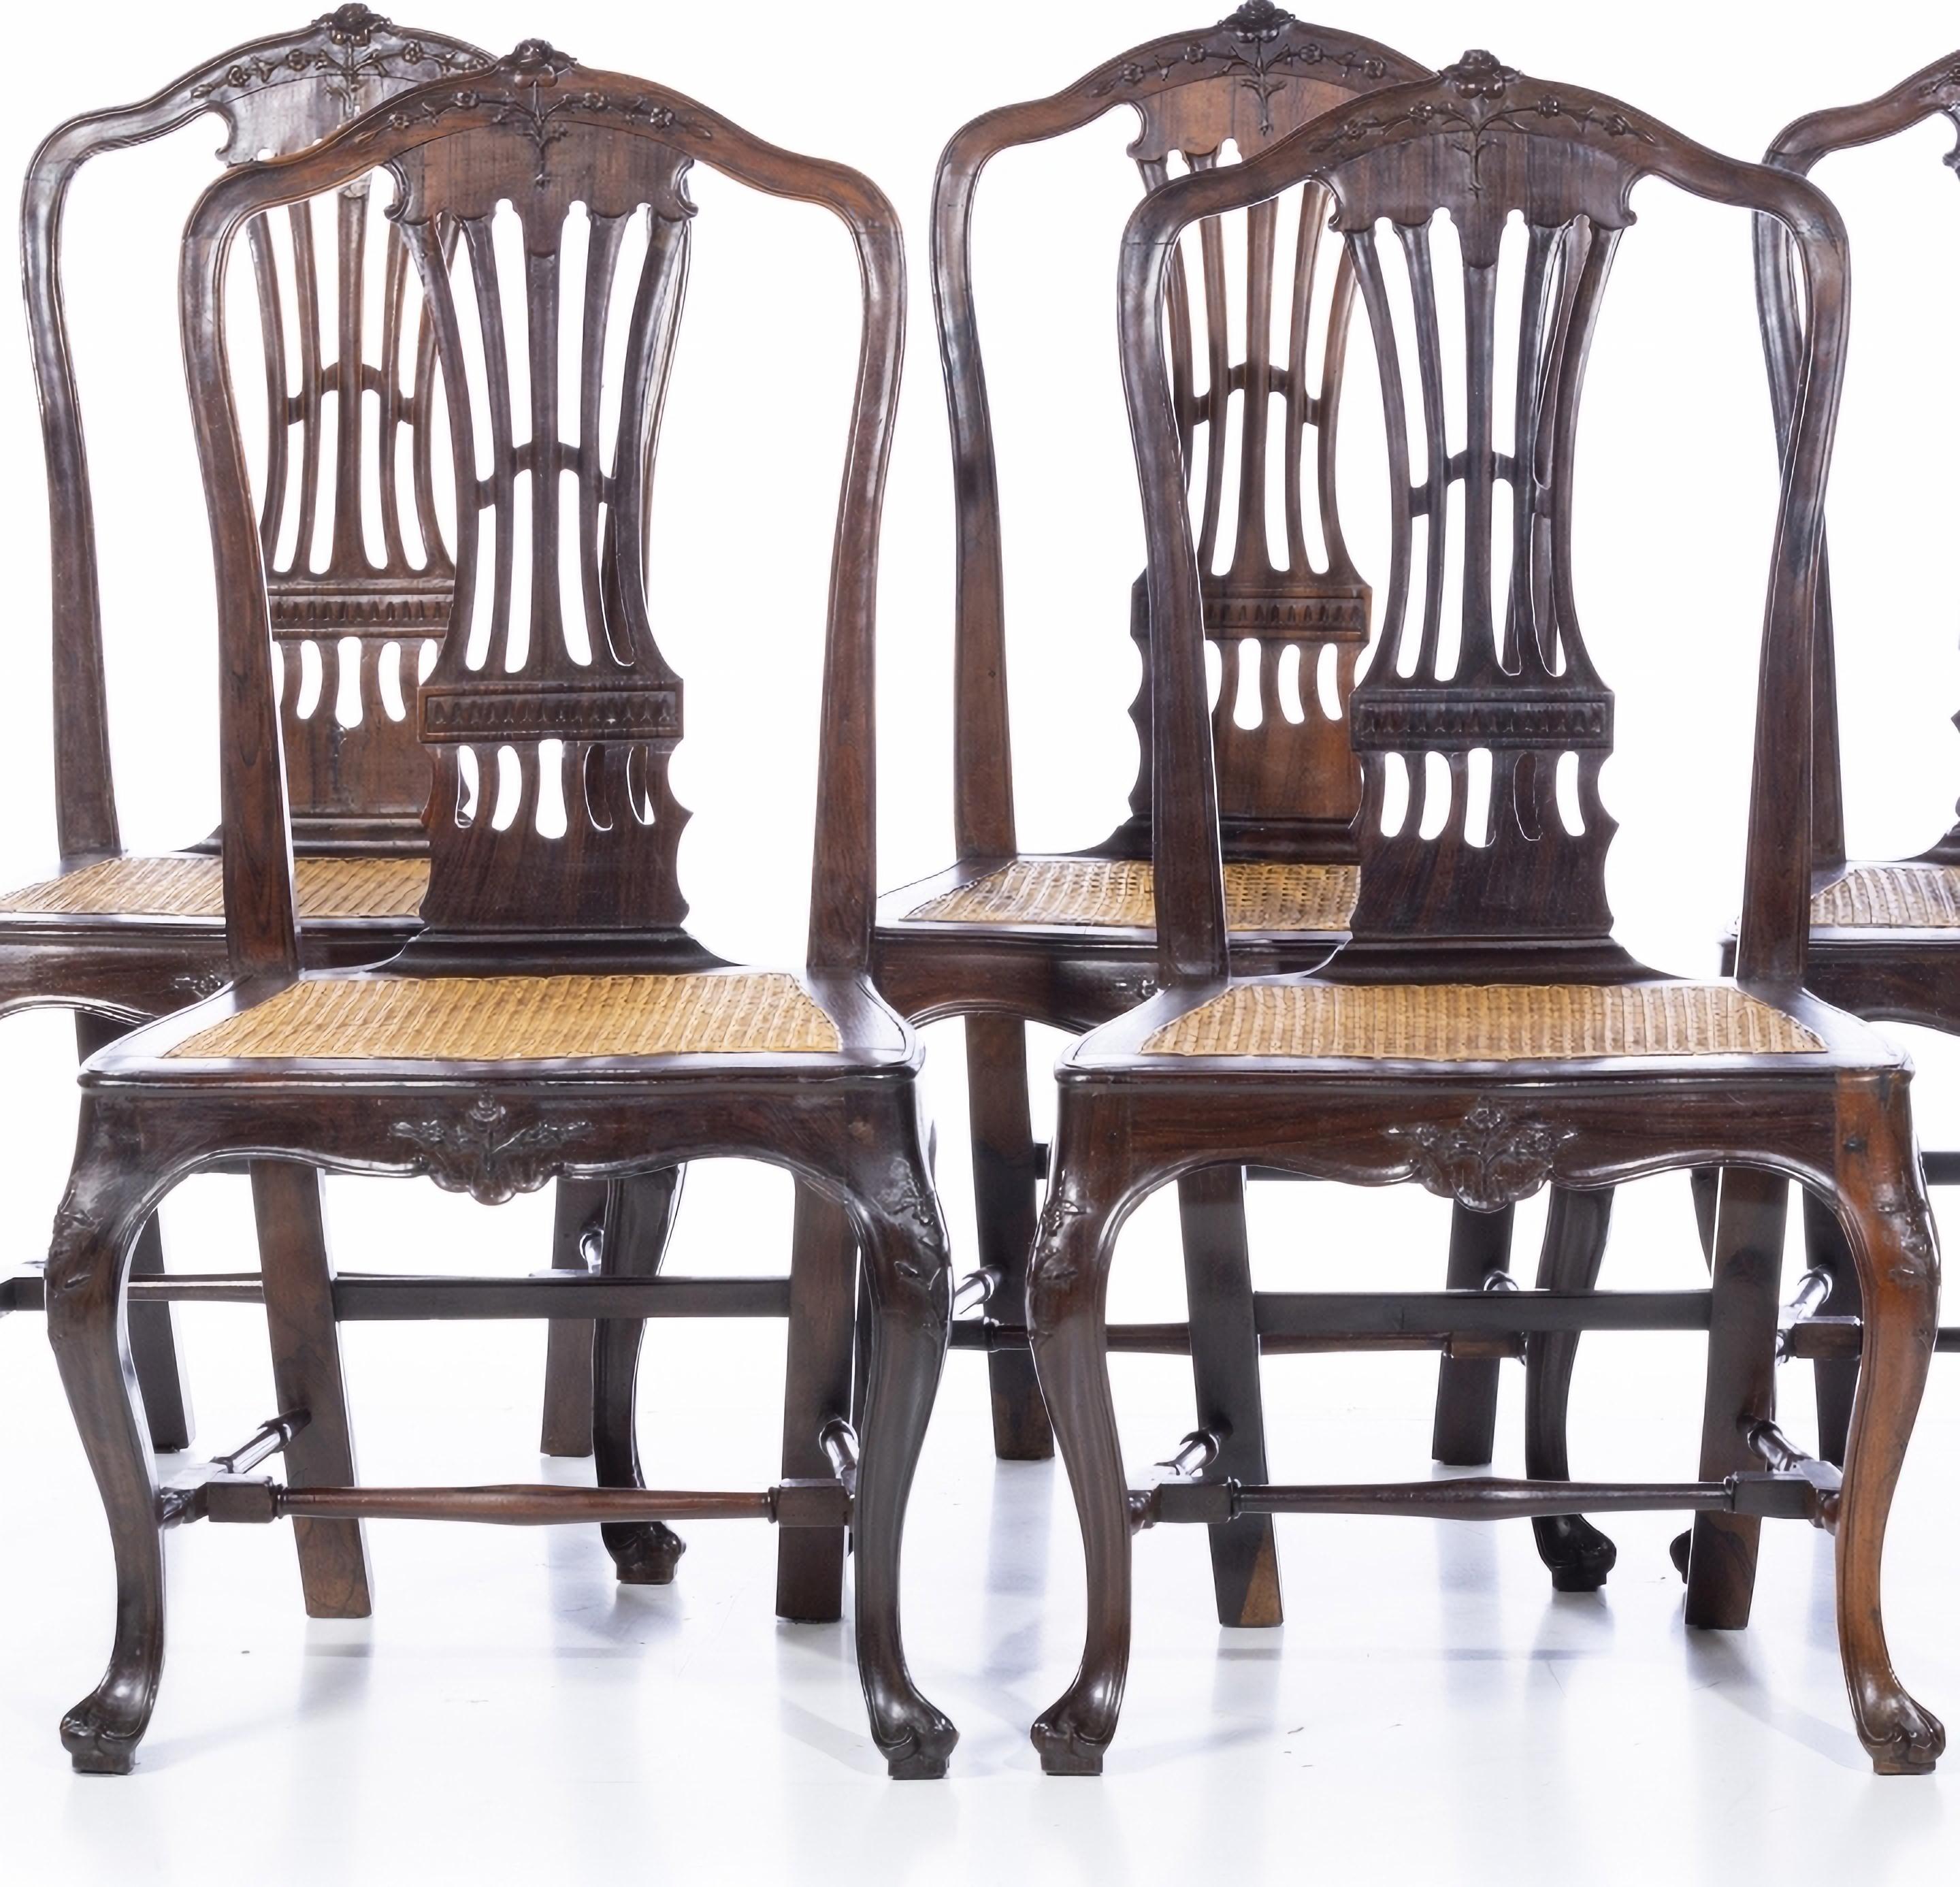 Renaissance SET OF SIX PORTUGUESE CHAIRS  18th Century in Brazilian Rosewood